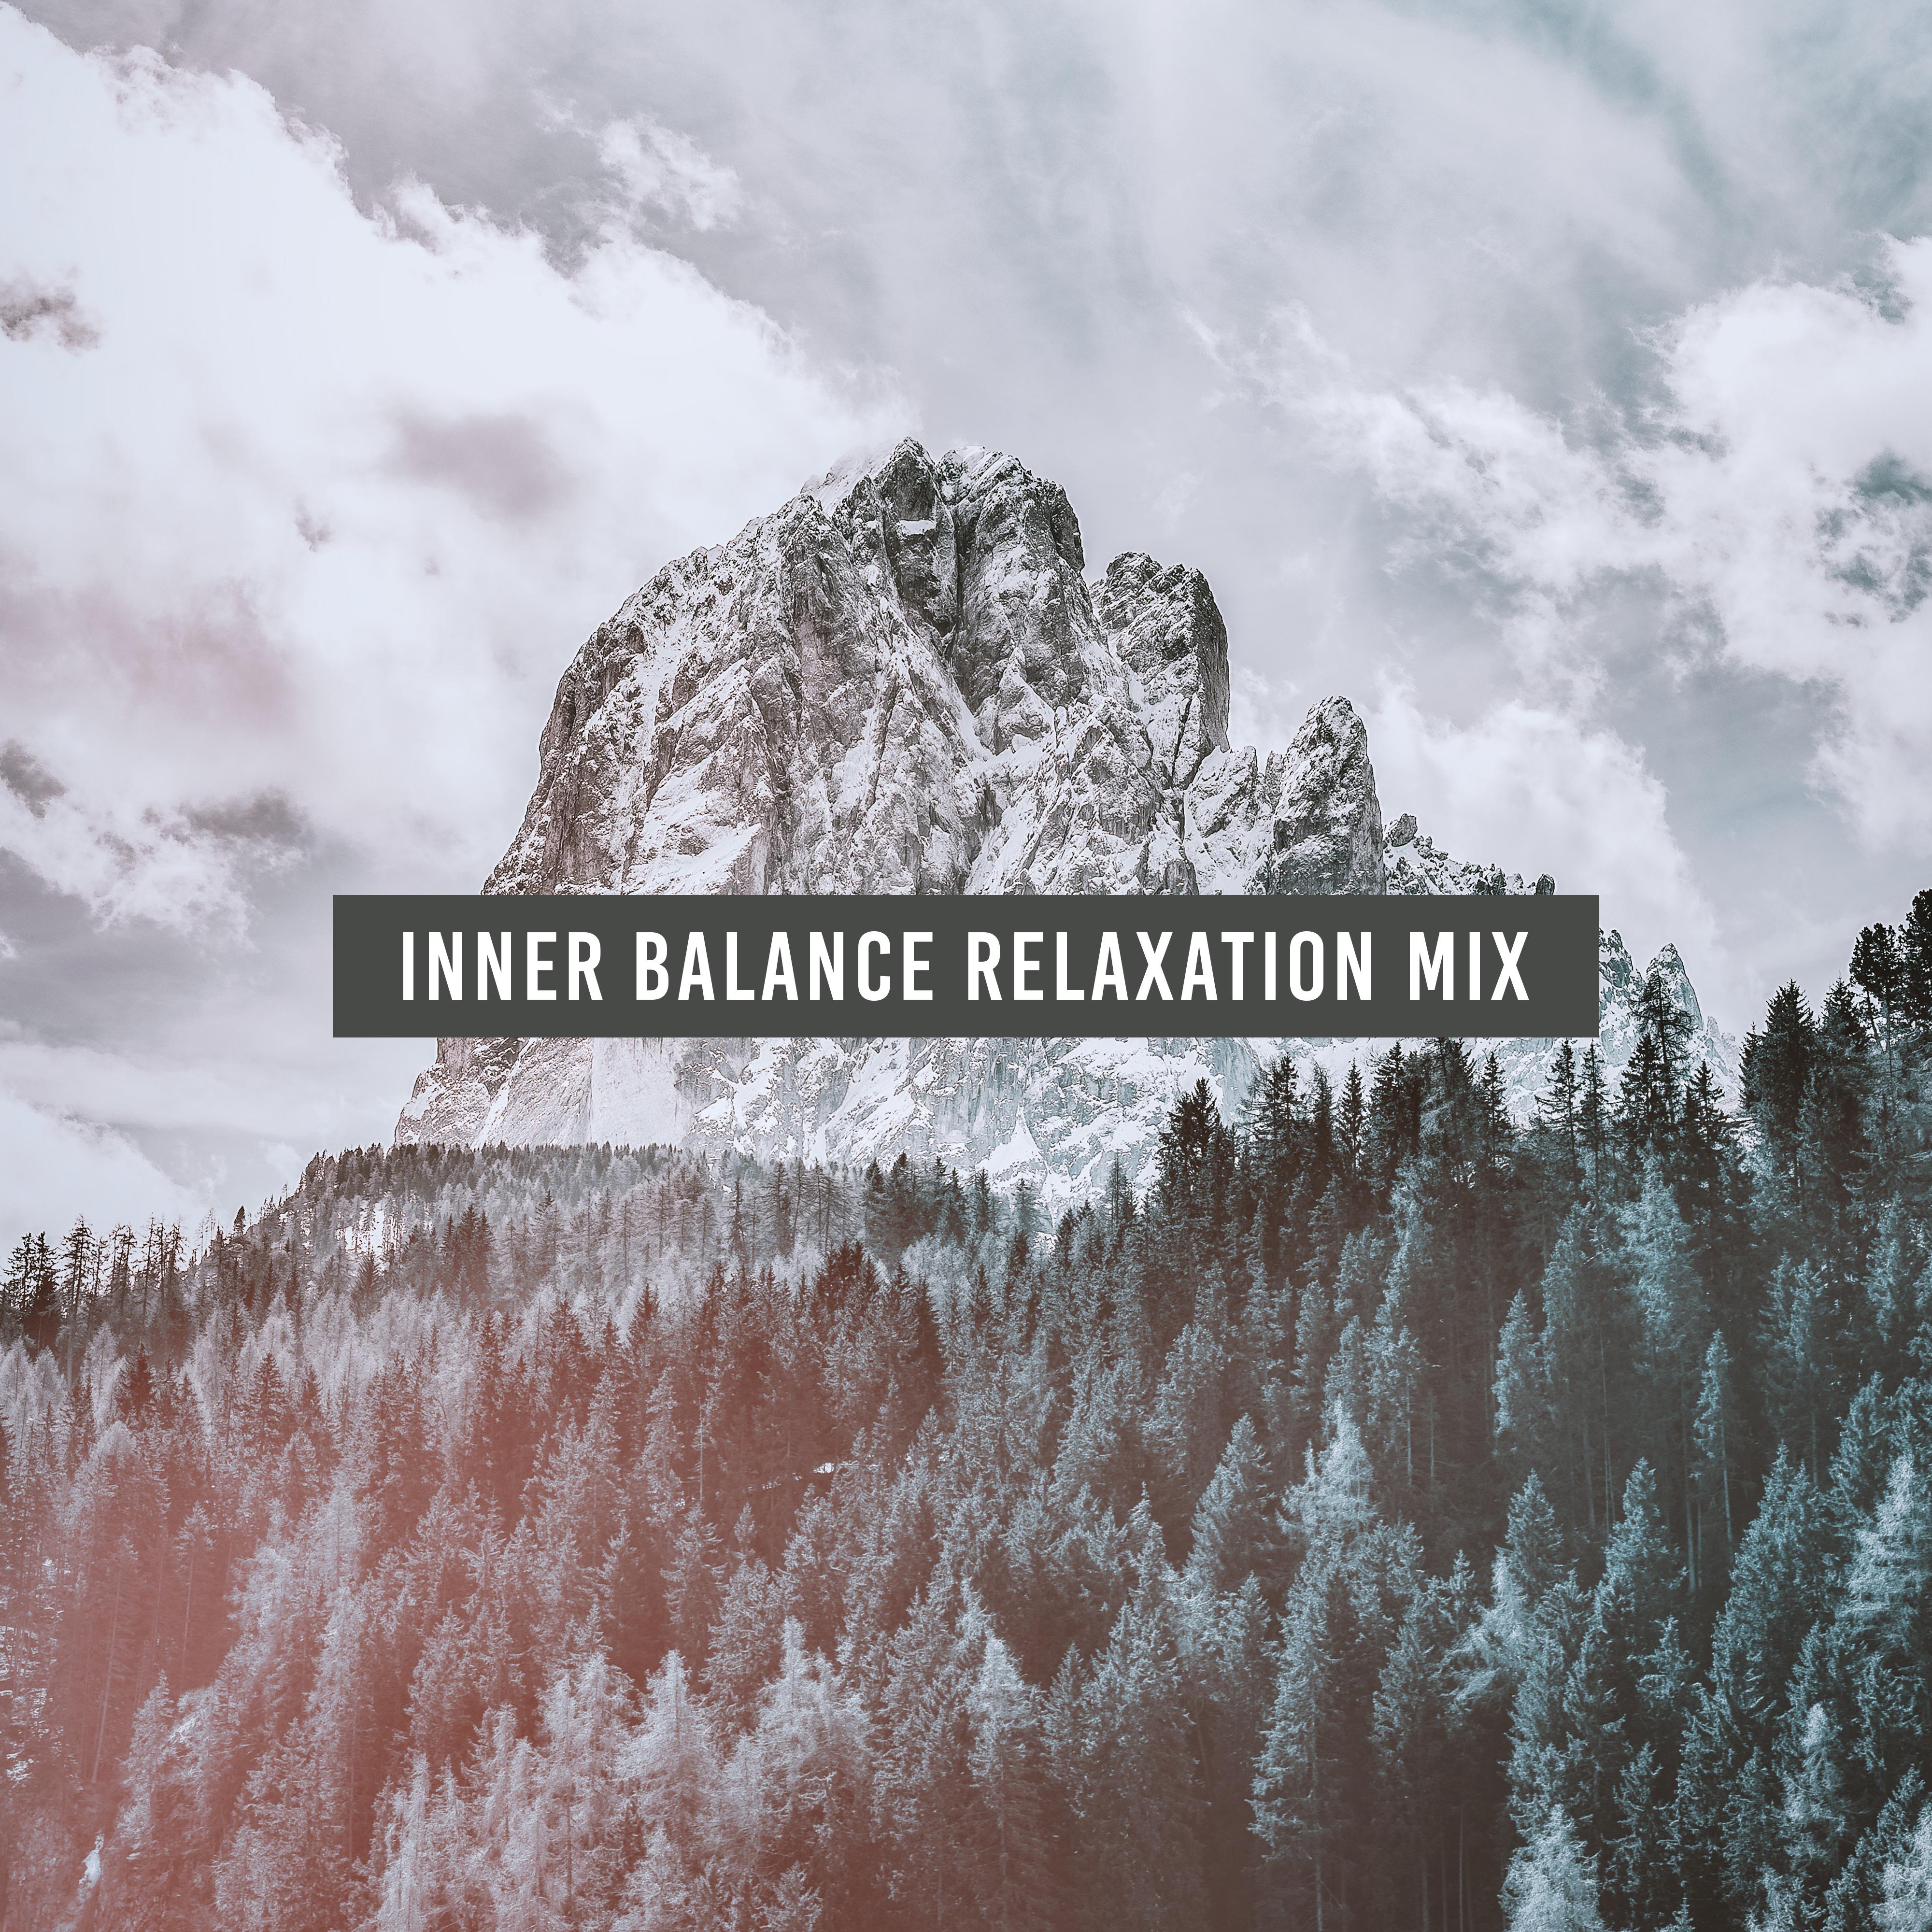 Inner Balance Relaxation Mix – New Age Music Compilation 2019, Full Calm Down & Stress Relief, Soothing Sounds Therapy, Pure Relax